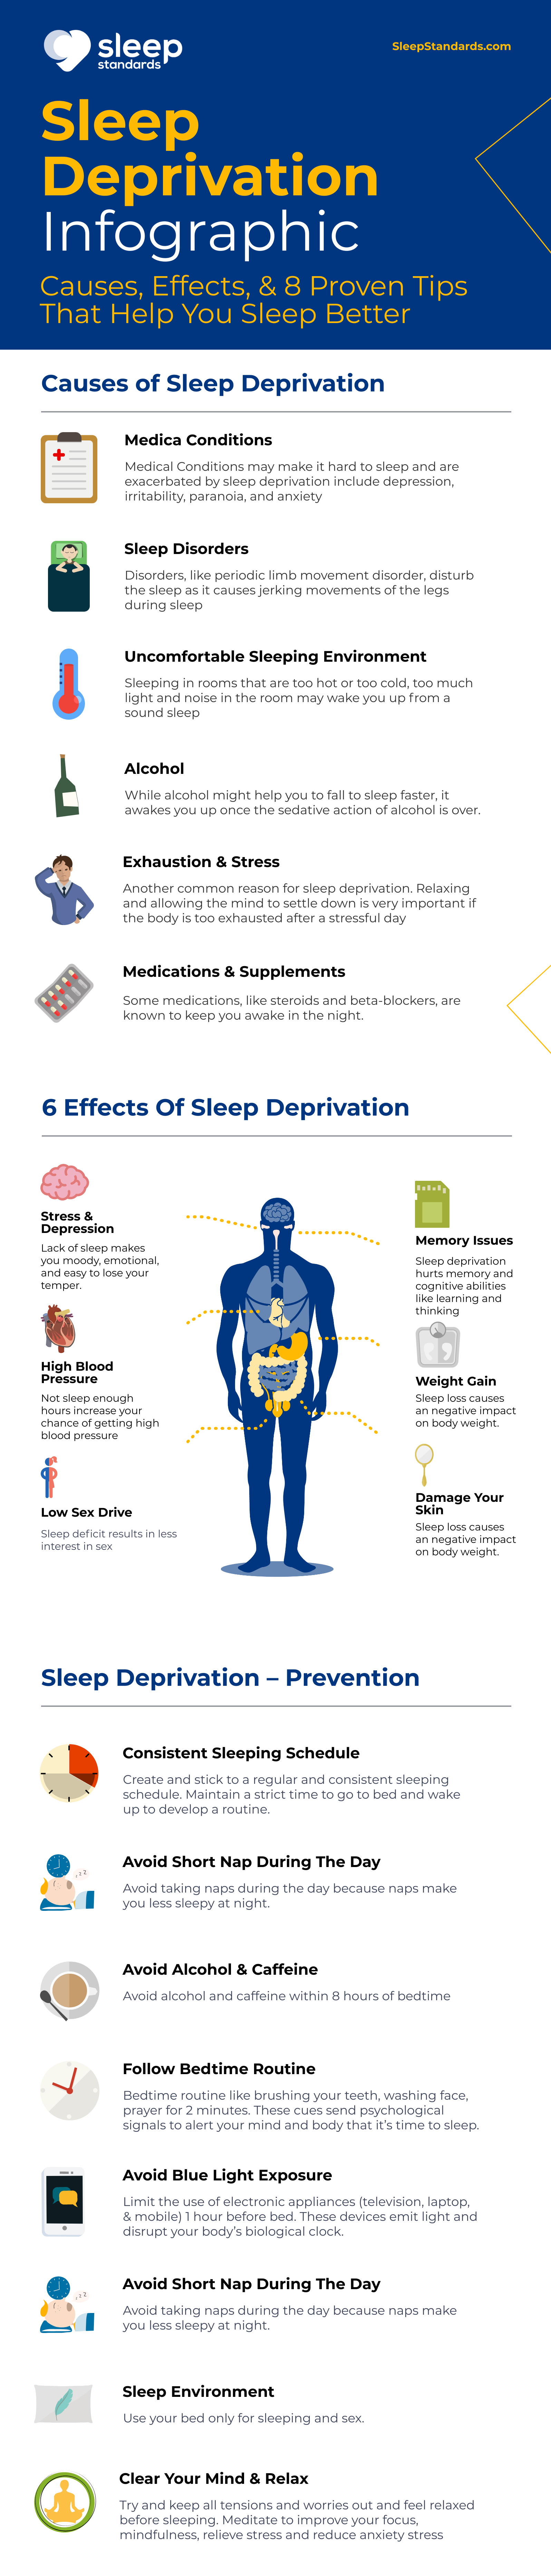 Physical effects of lack of sleep